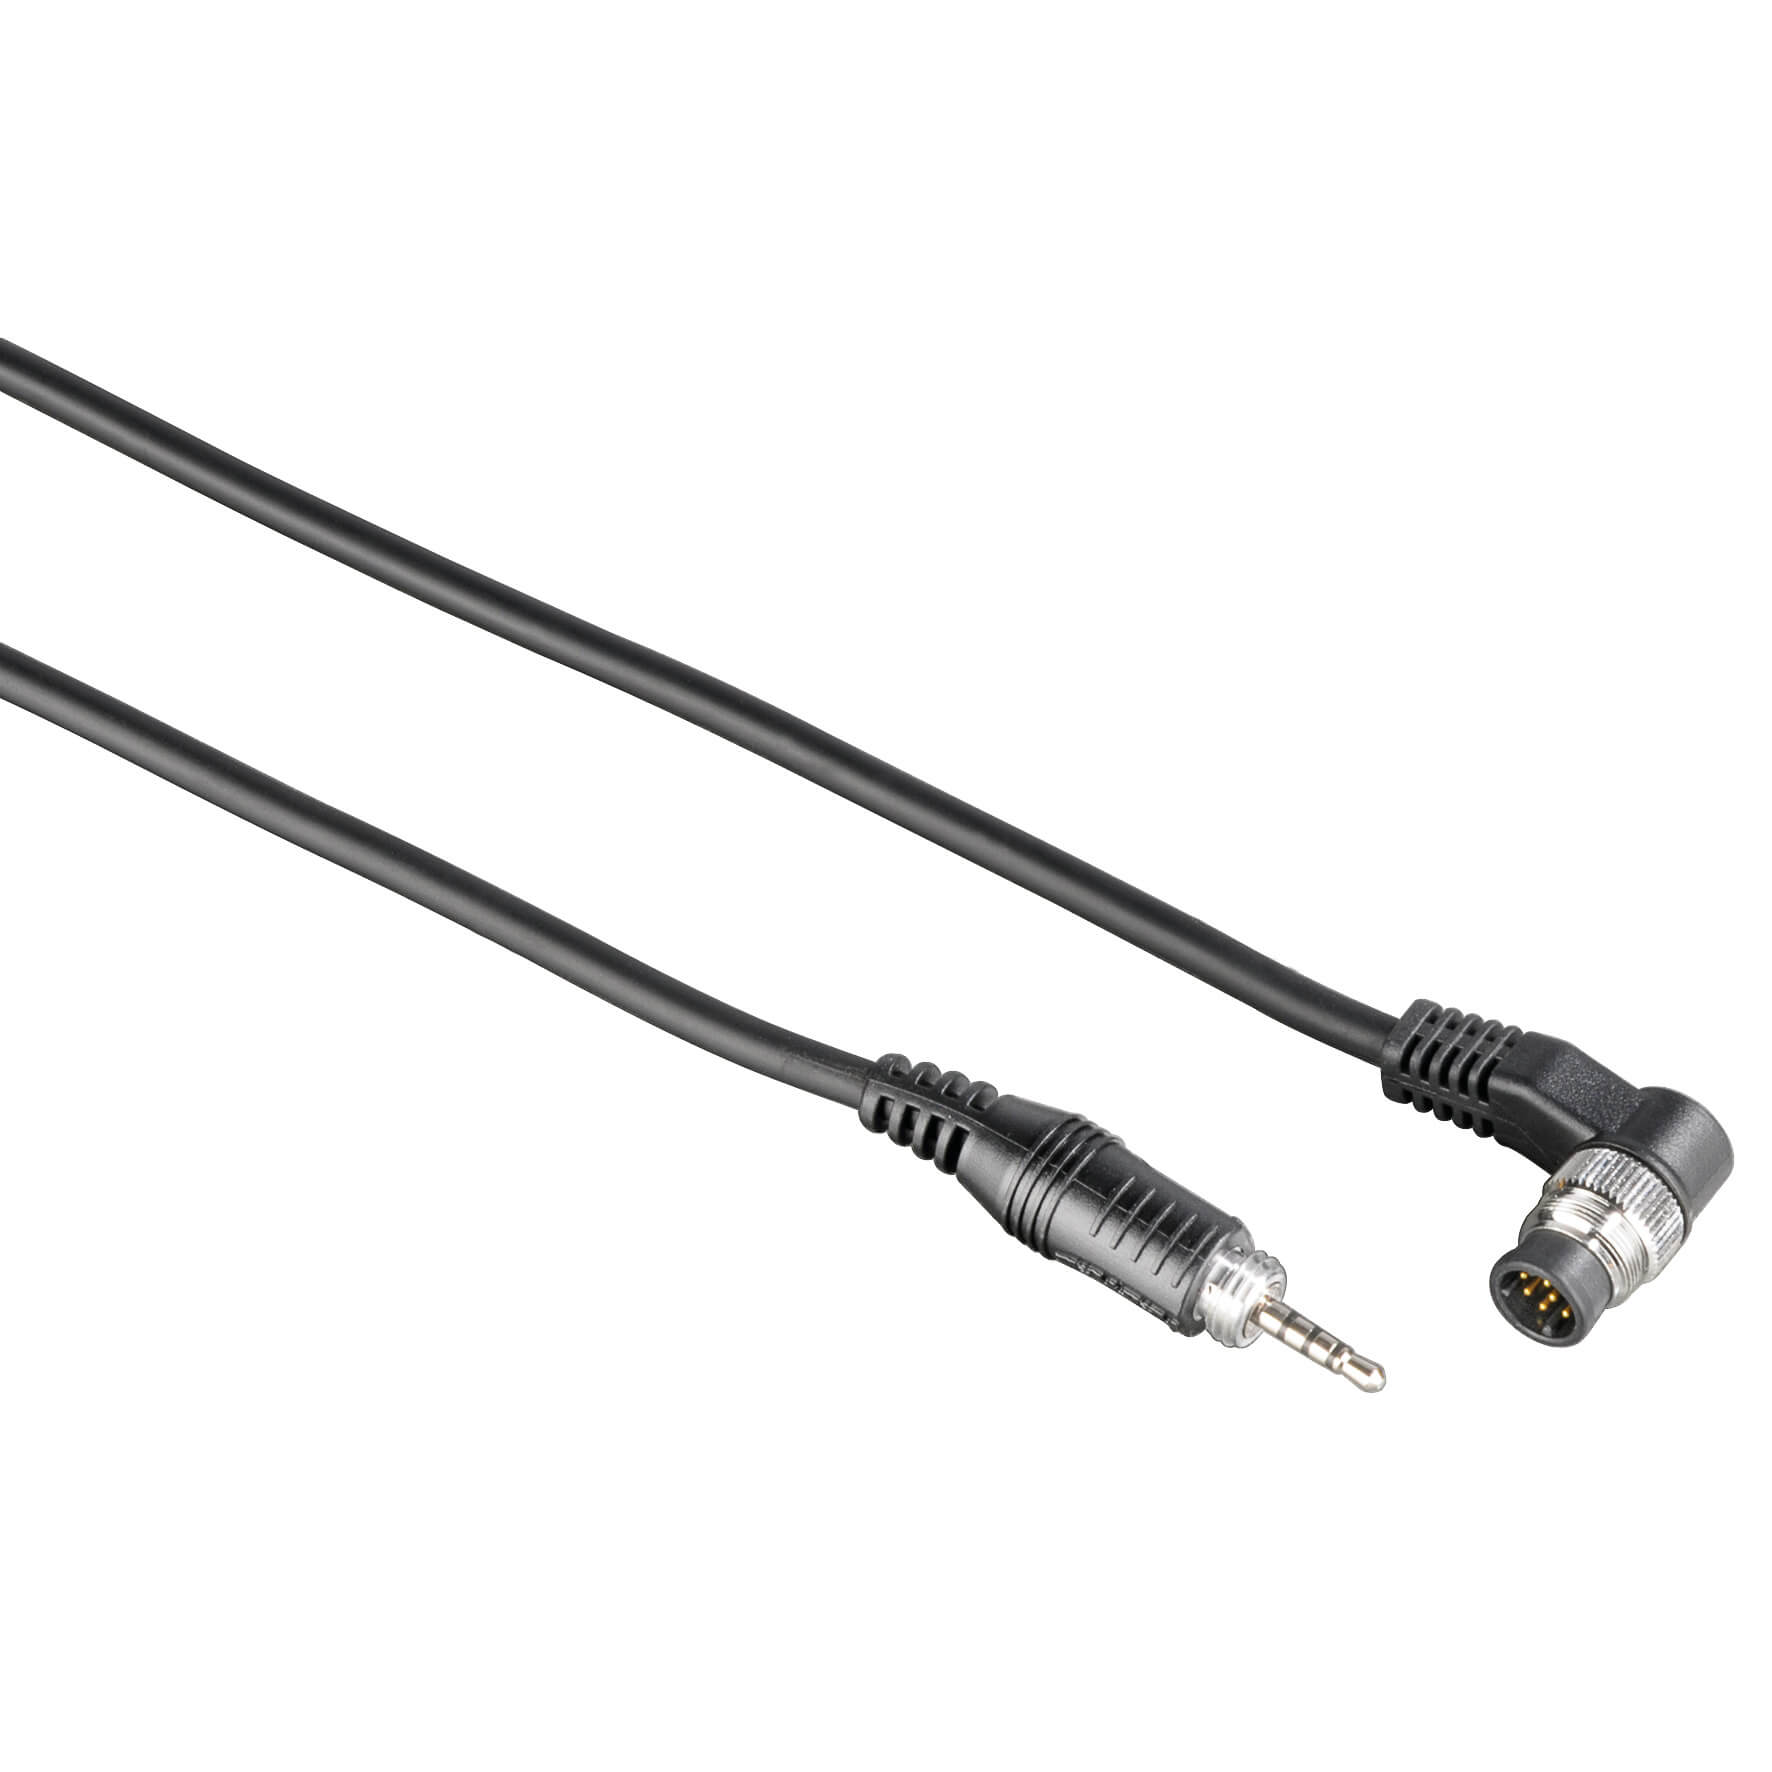 Connection Adapter Cable for Nikon DCCSystem NI-1